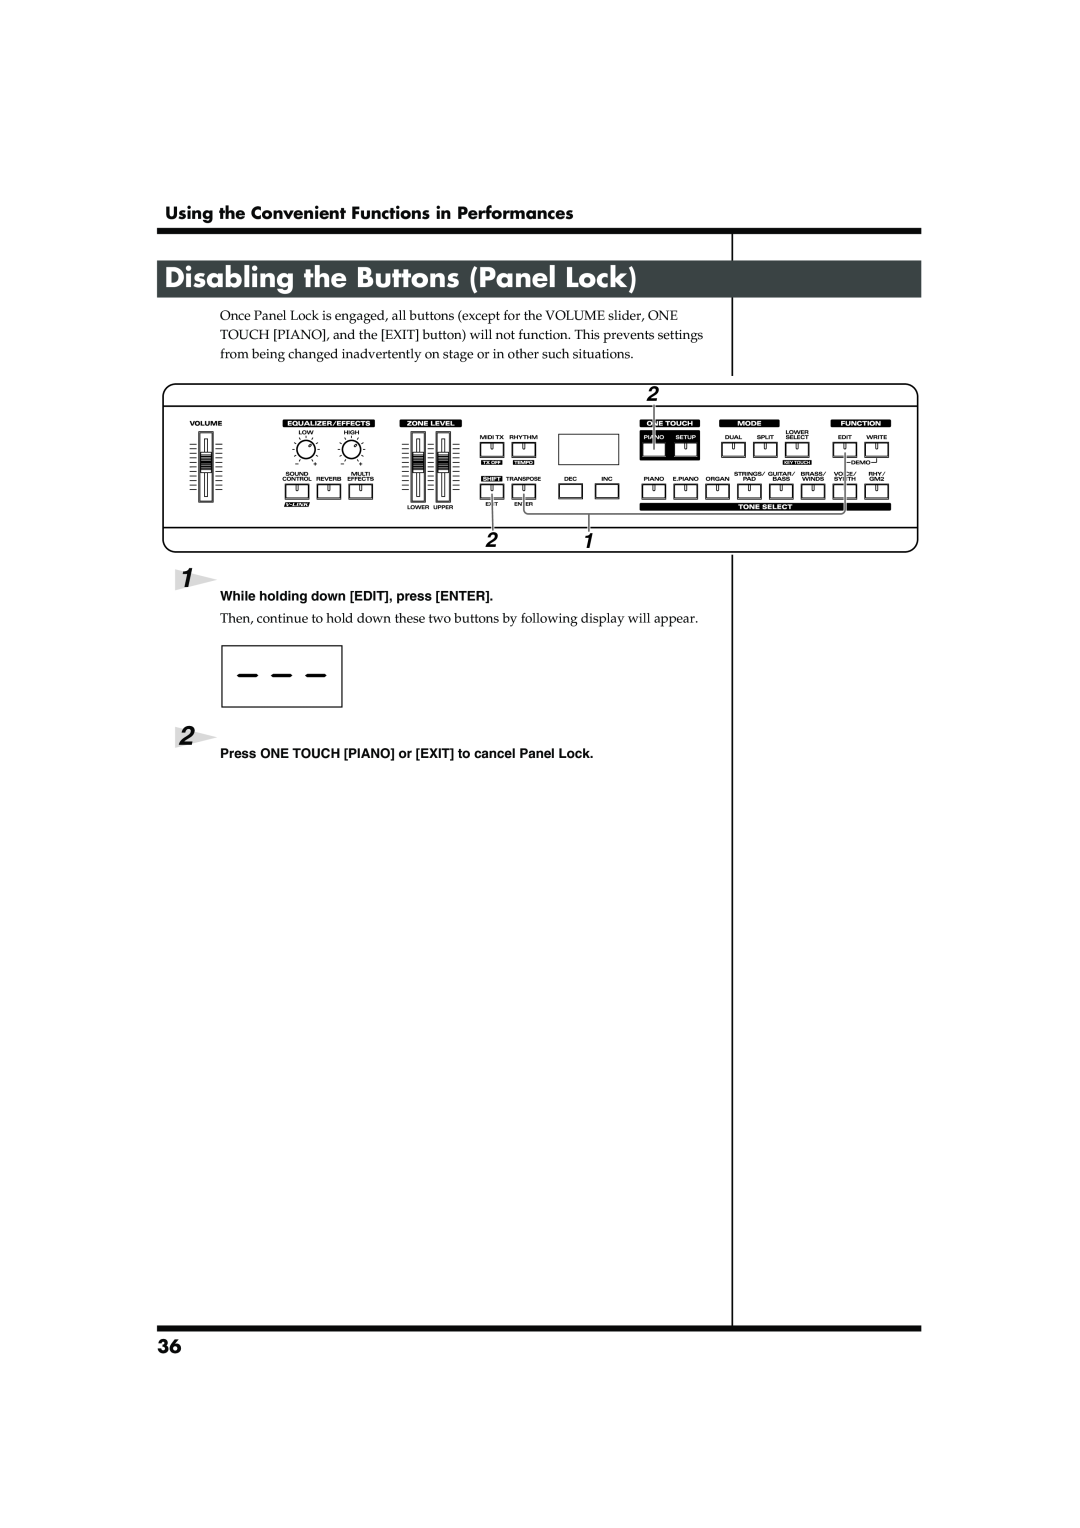 Roland RD-300SX owner manual Disabling the Buttons Panel Lock, Using the Convenient Functions in Performances 